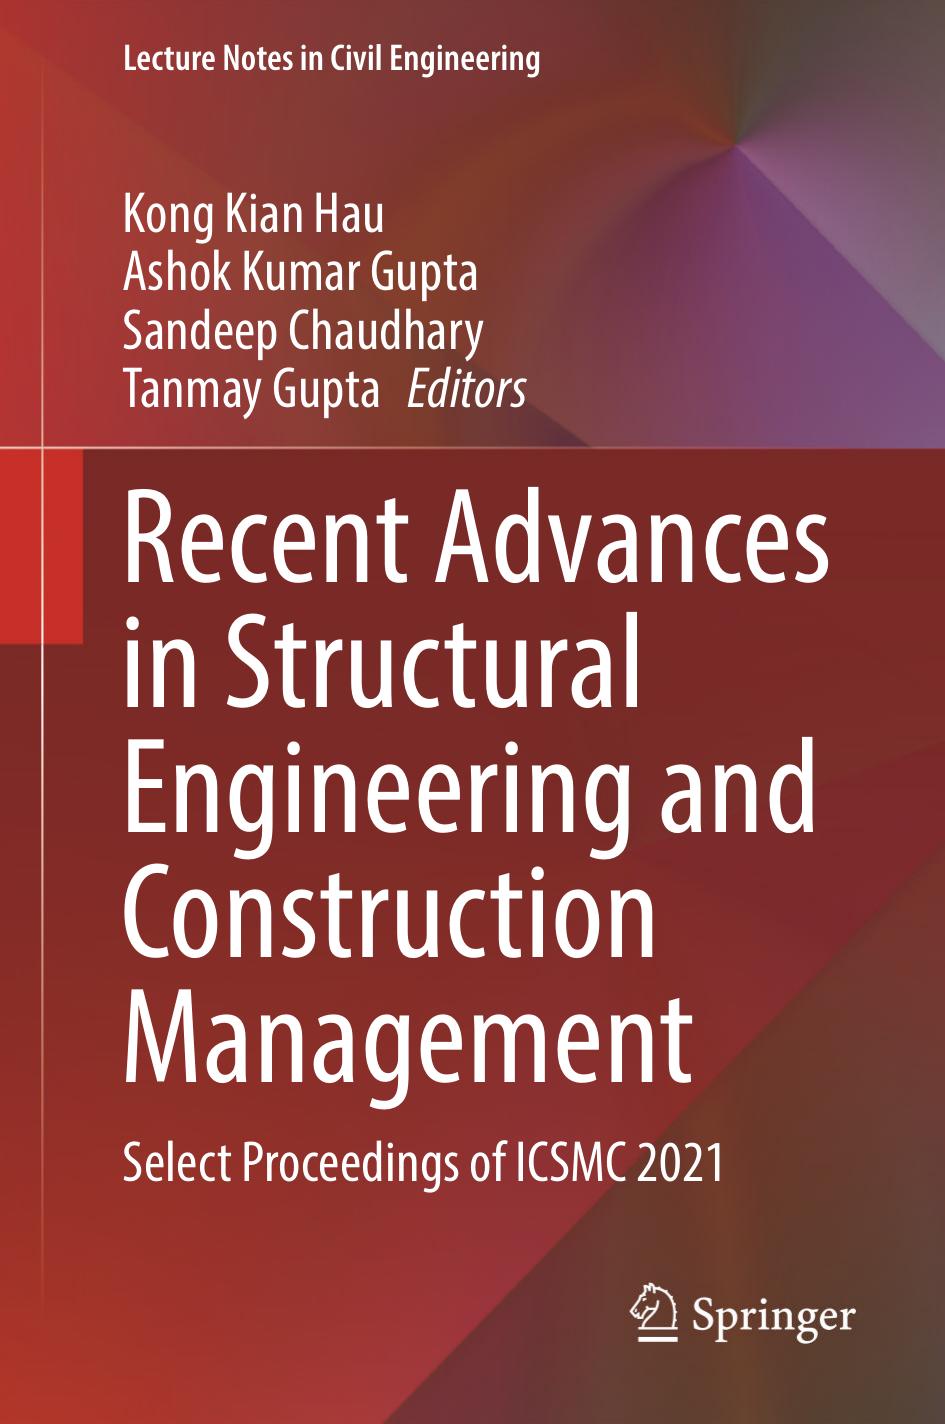 Recent Advances in Structural Engineering and Construction Management